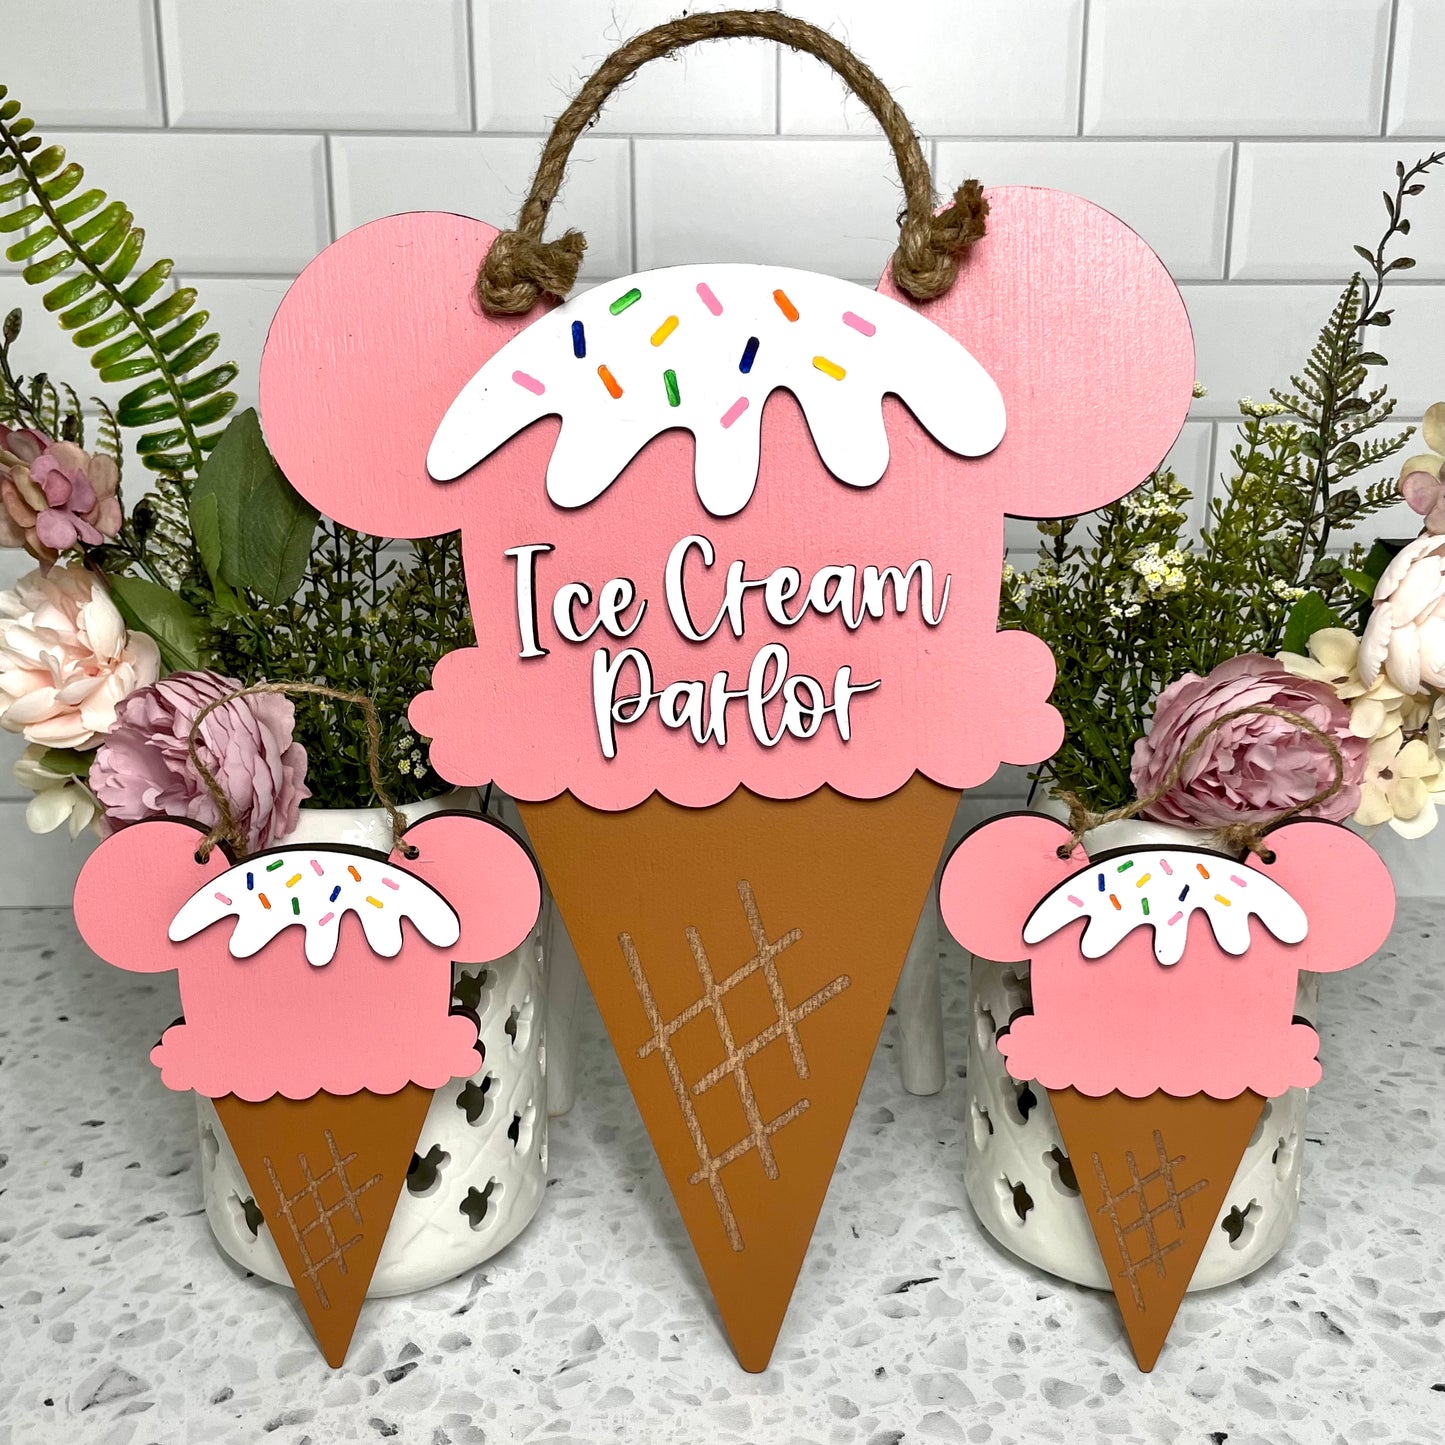 Ice Cream Parlor Wall Sign